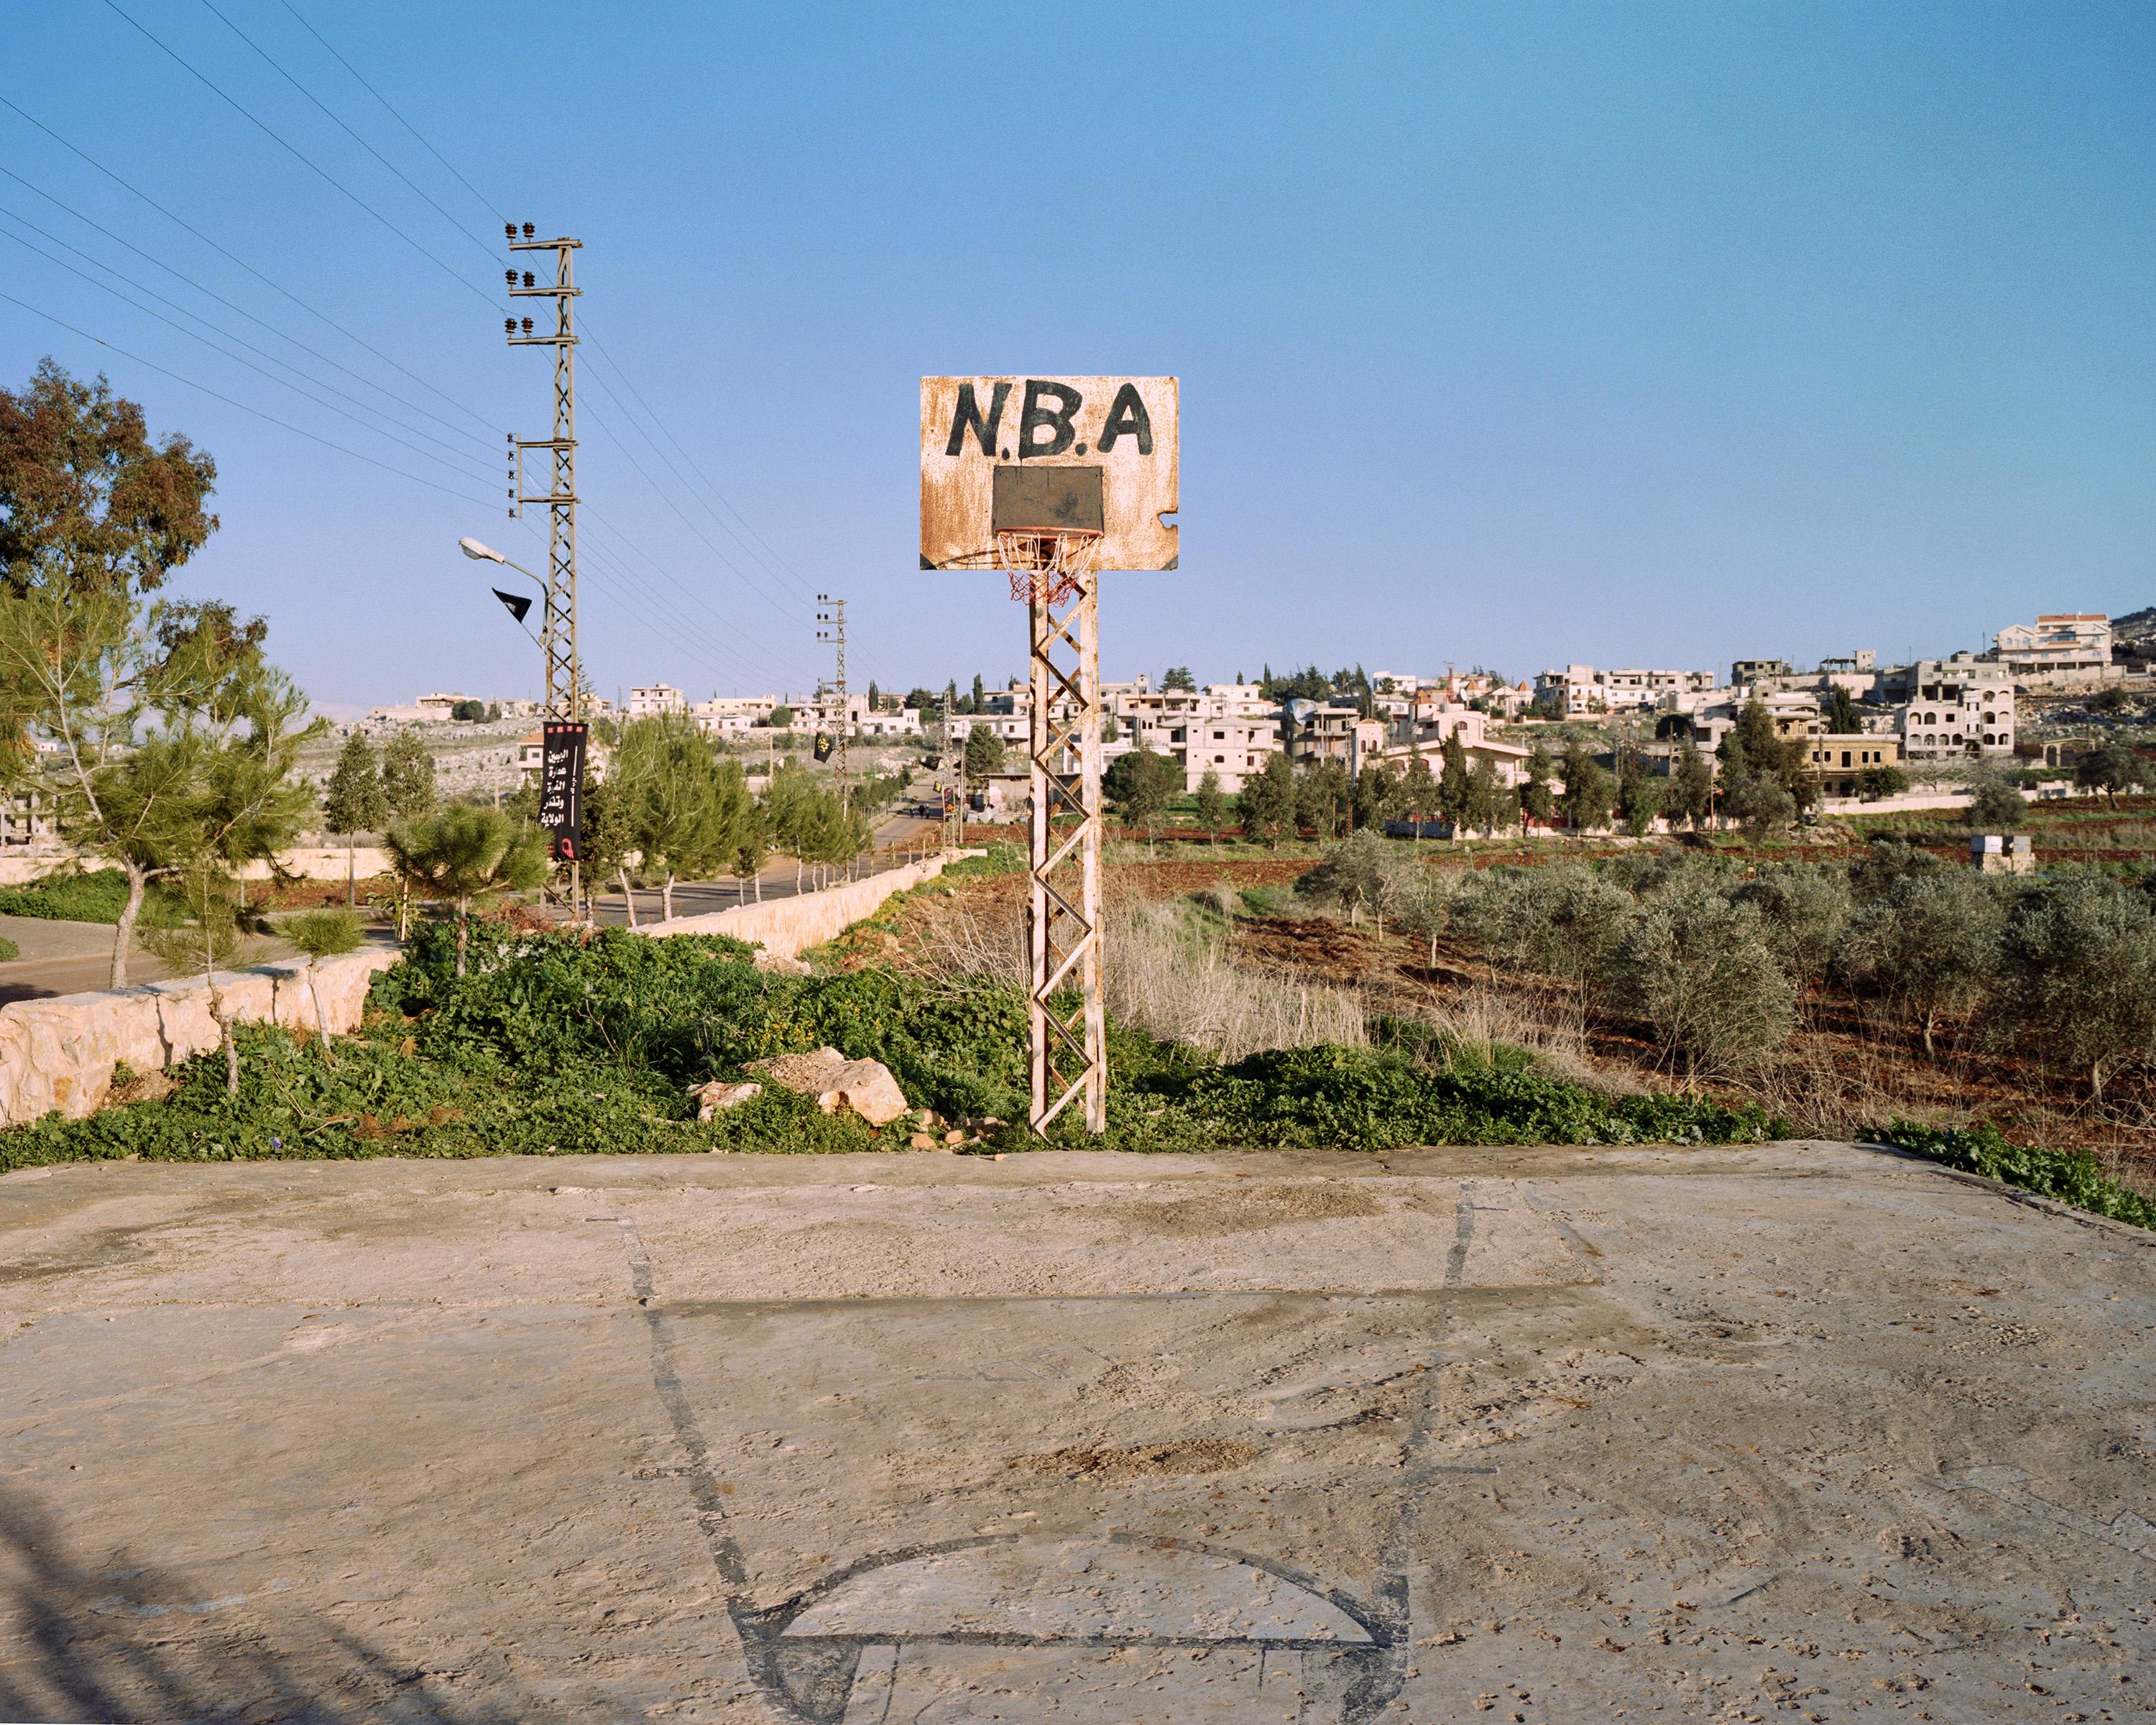 Sean Hemmerle Color Photograph - "Nebatieh, Lebanon, 2007" HOOPS basketball court limited edition photograph